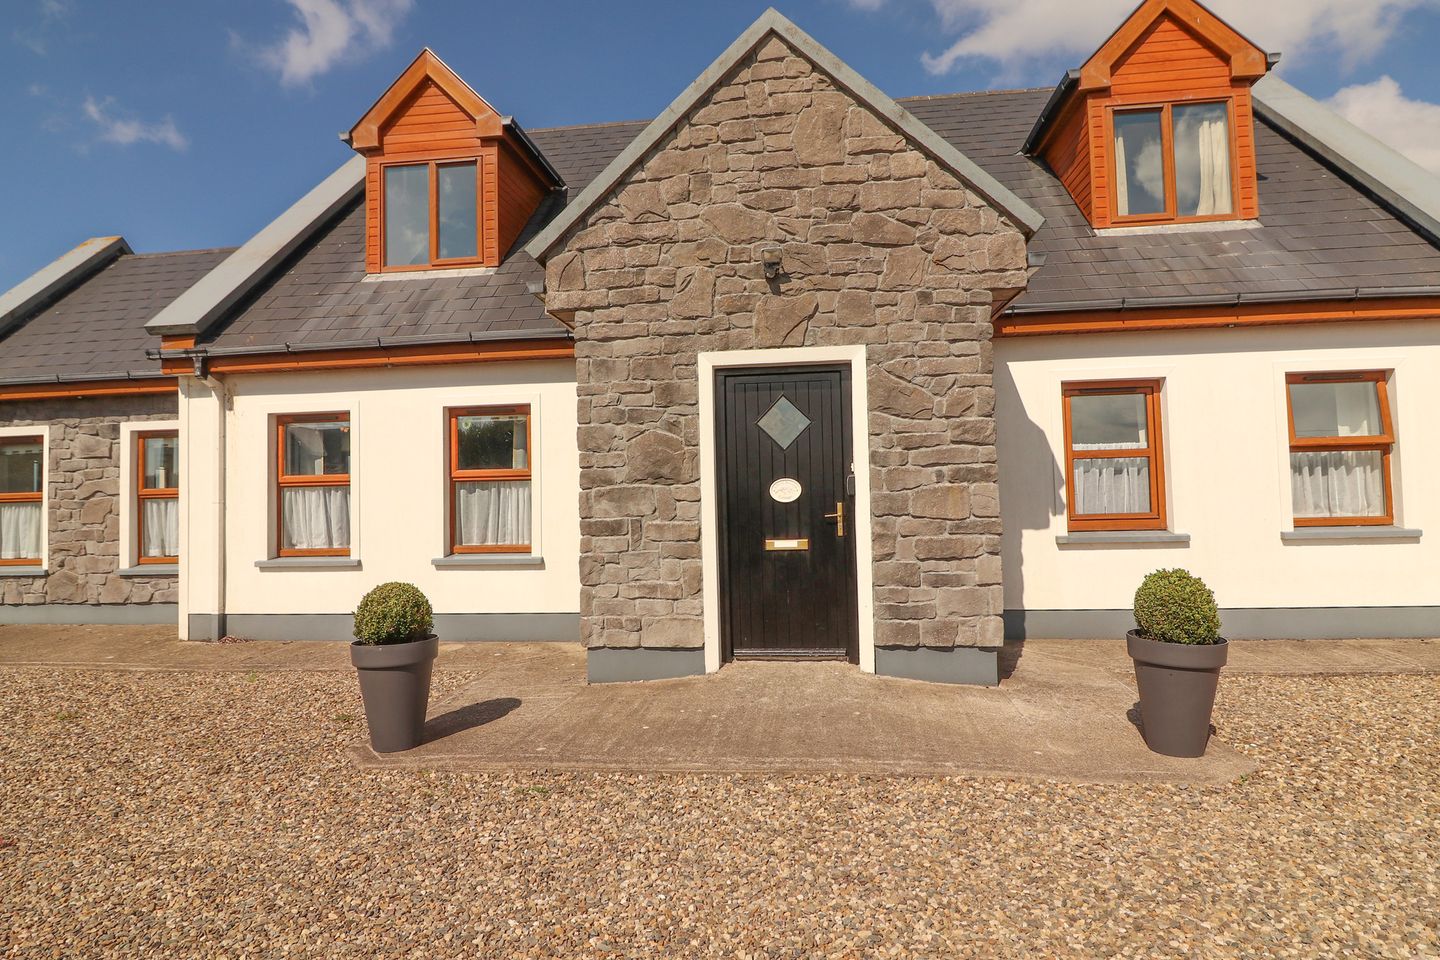 Ref. 1059276 Cherry Blossom Cottage, QUILTY EAST, Ennis, Co. Clare